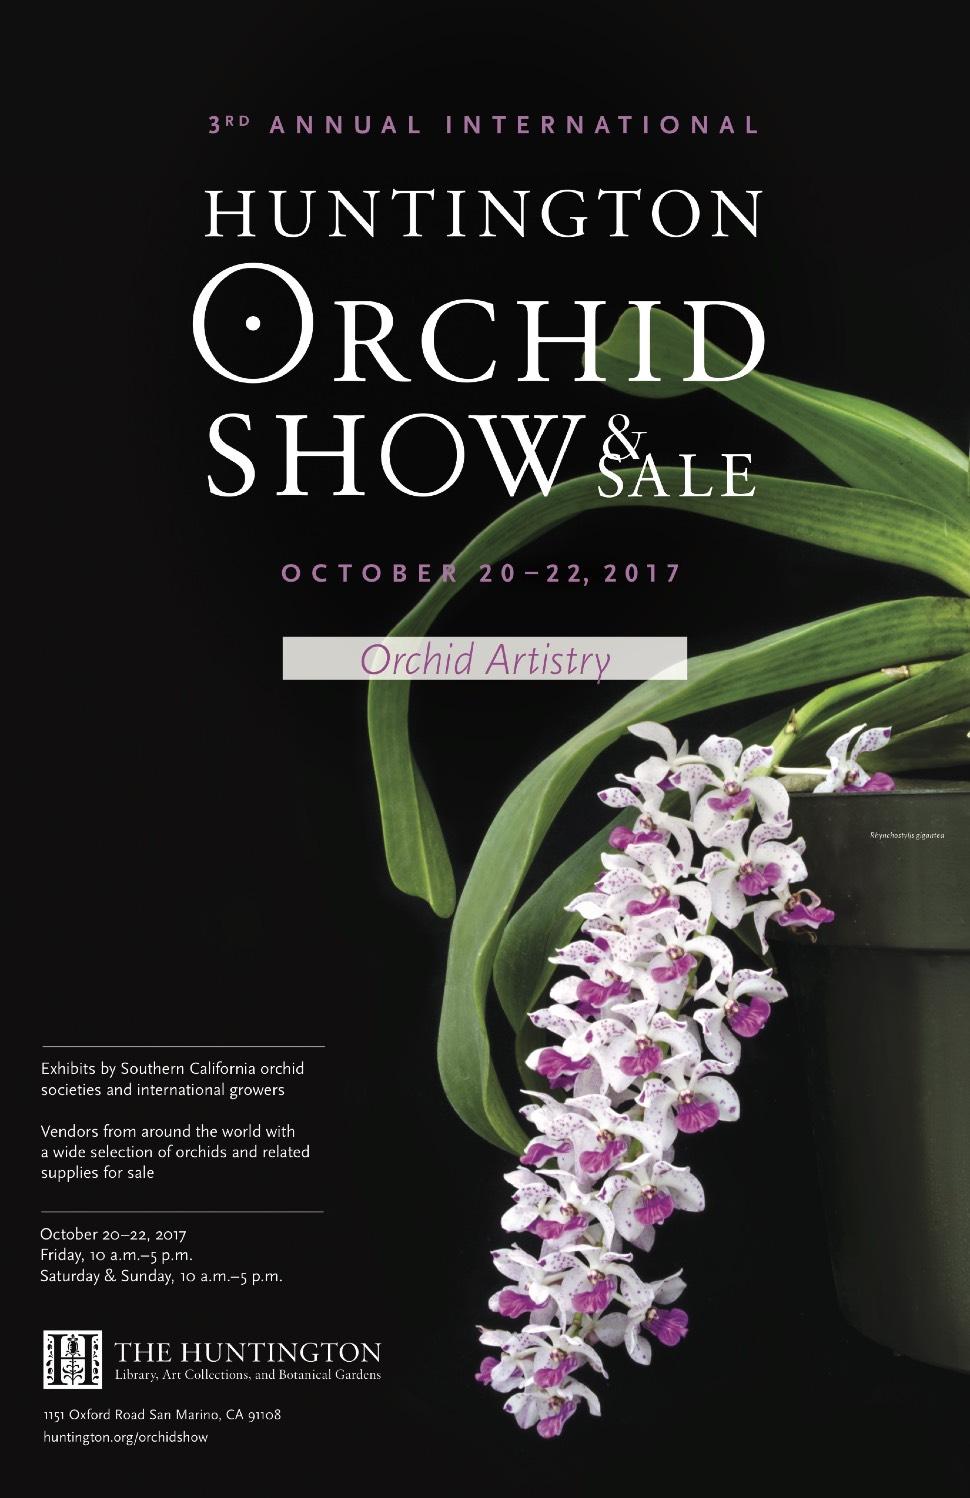 COS Will Have Exhibit At Huntington Orchid Show To Be Held October 20-22 The Huntington Orchid Show is right around the corner, Friday through Sunday, Oct 20-22.